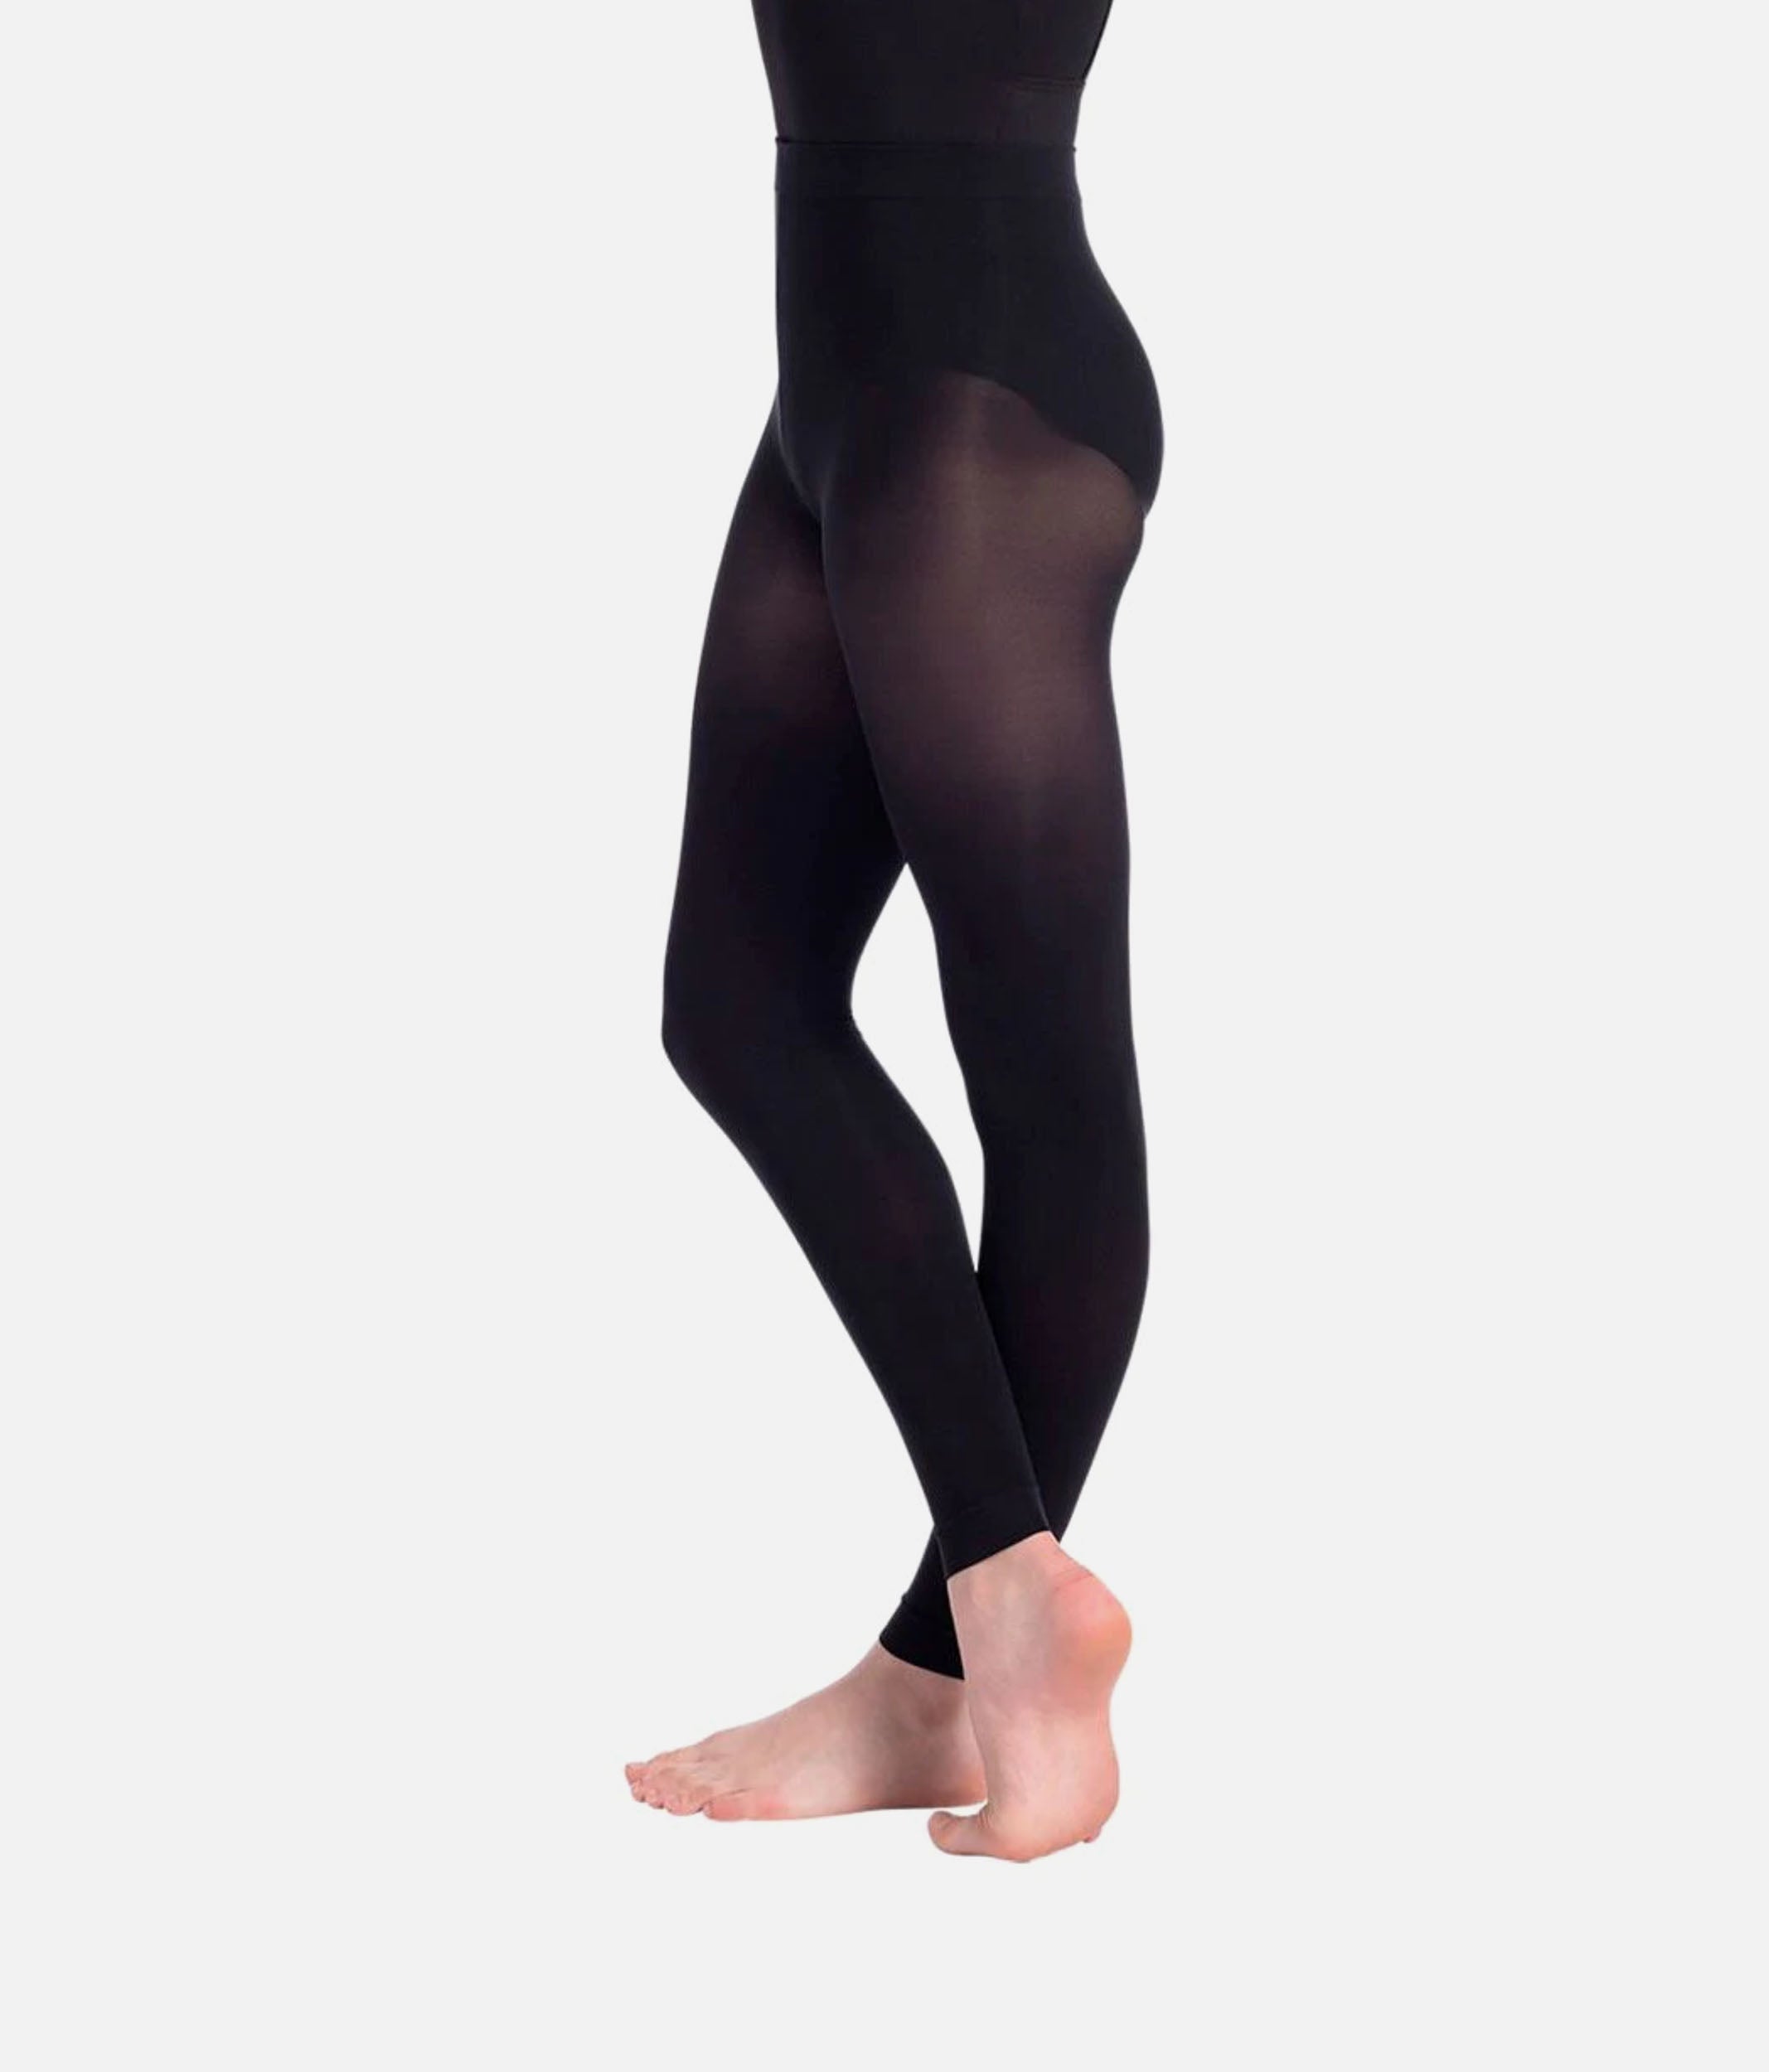 Full Length Footless Tights Legginggs Variety of Colors One Size